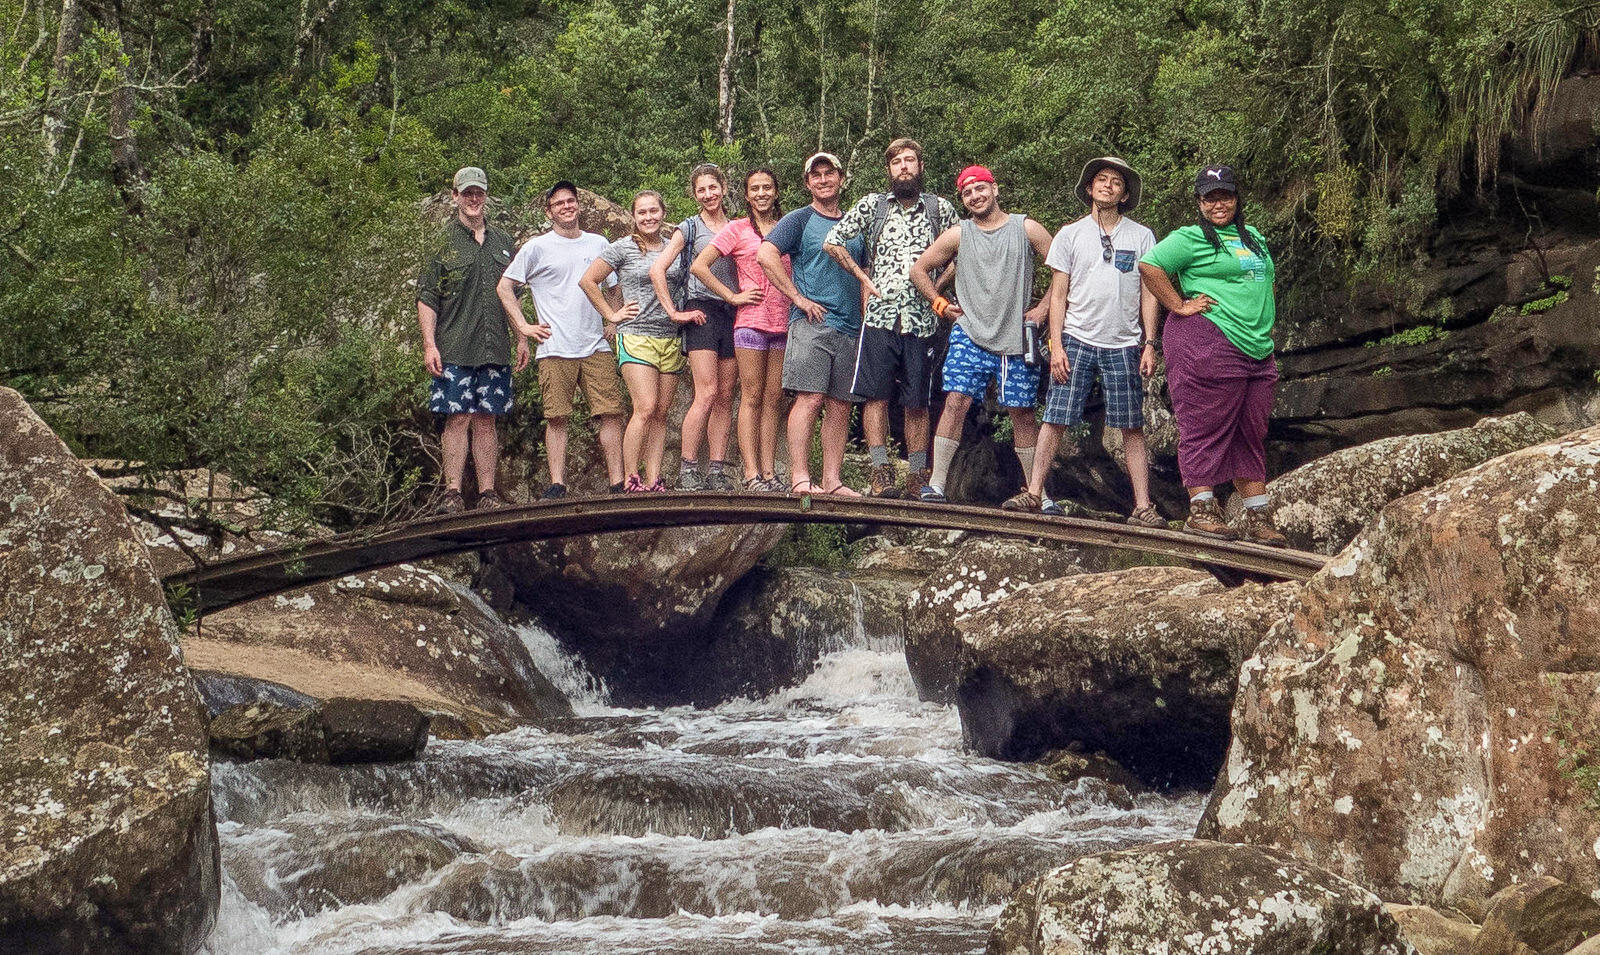 Group photo on footbridge over Mahai River in Royal Natal National Park. Pictured from left to right: Thomas Vinyard III, Nick Kelly, Christine Savoie, Shira Lanyi, Simren Bhatt, James Vonesh, Trevor Young, Mahad Mustafa, Diego Azuga and Nycole Taliaferro. Not pictured: Dan Carr.
<br>Photo by Dan Carr.